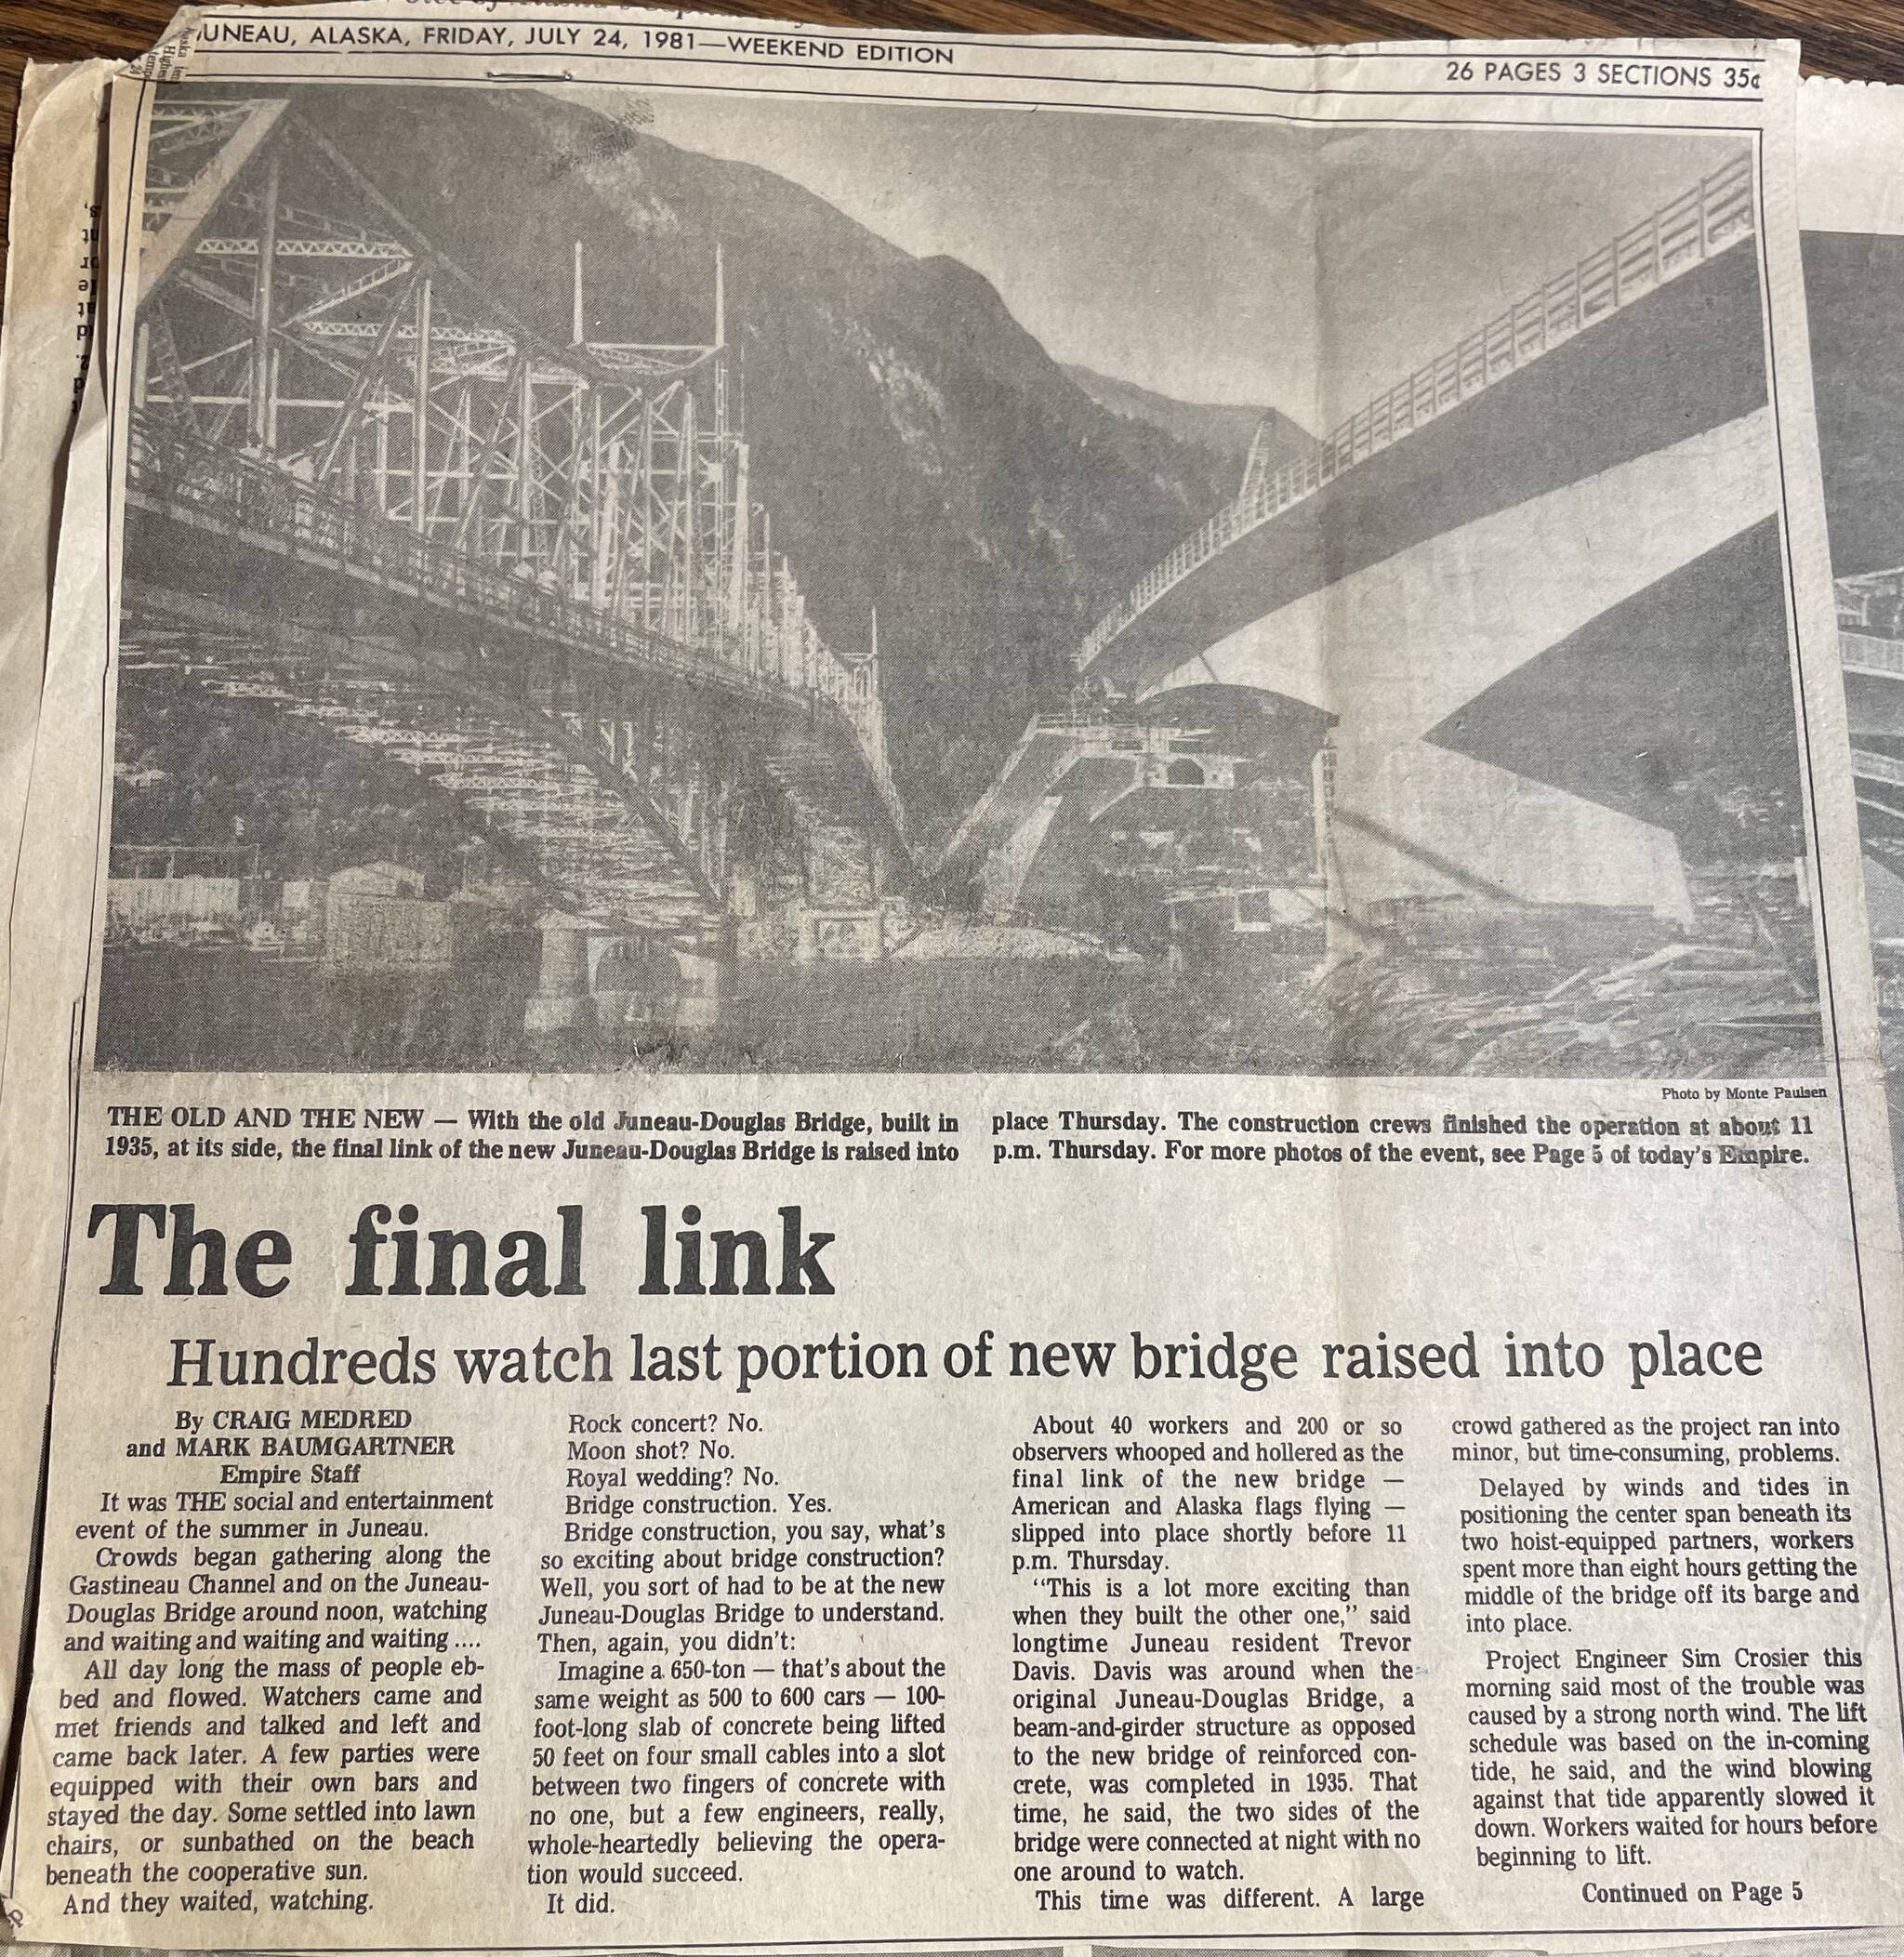 Juneau Empire front page July 24, 1981, with the headline “The final link” shows both 1935 and 1981 Douglas bridges.